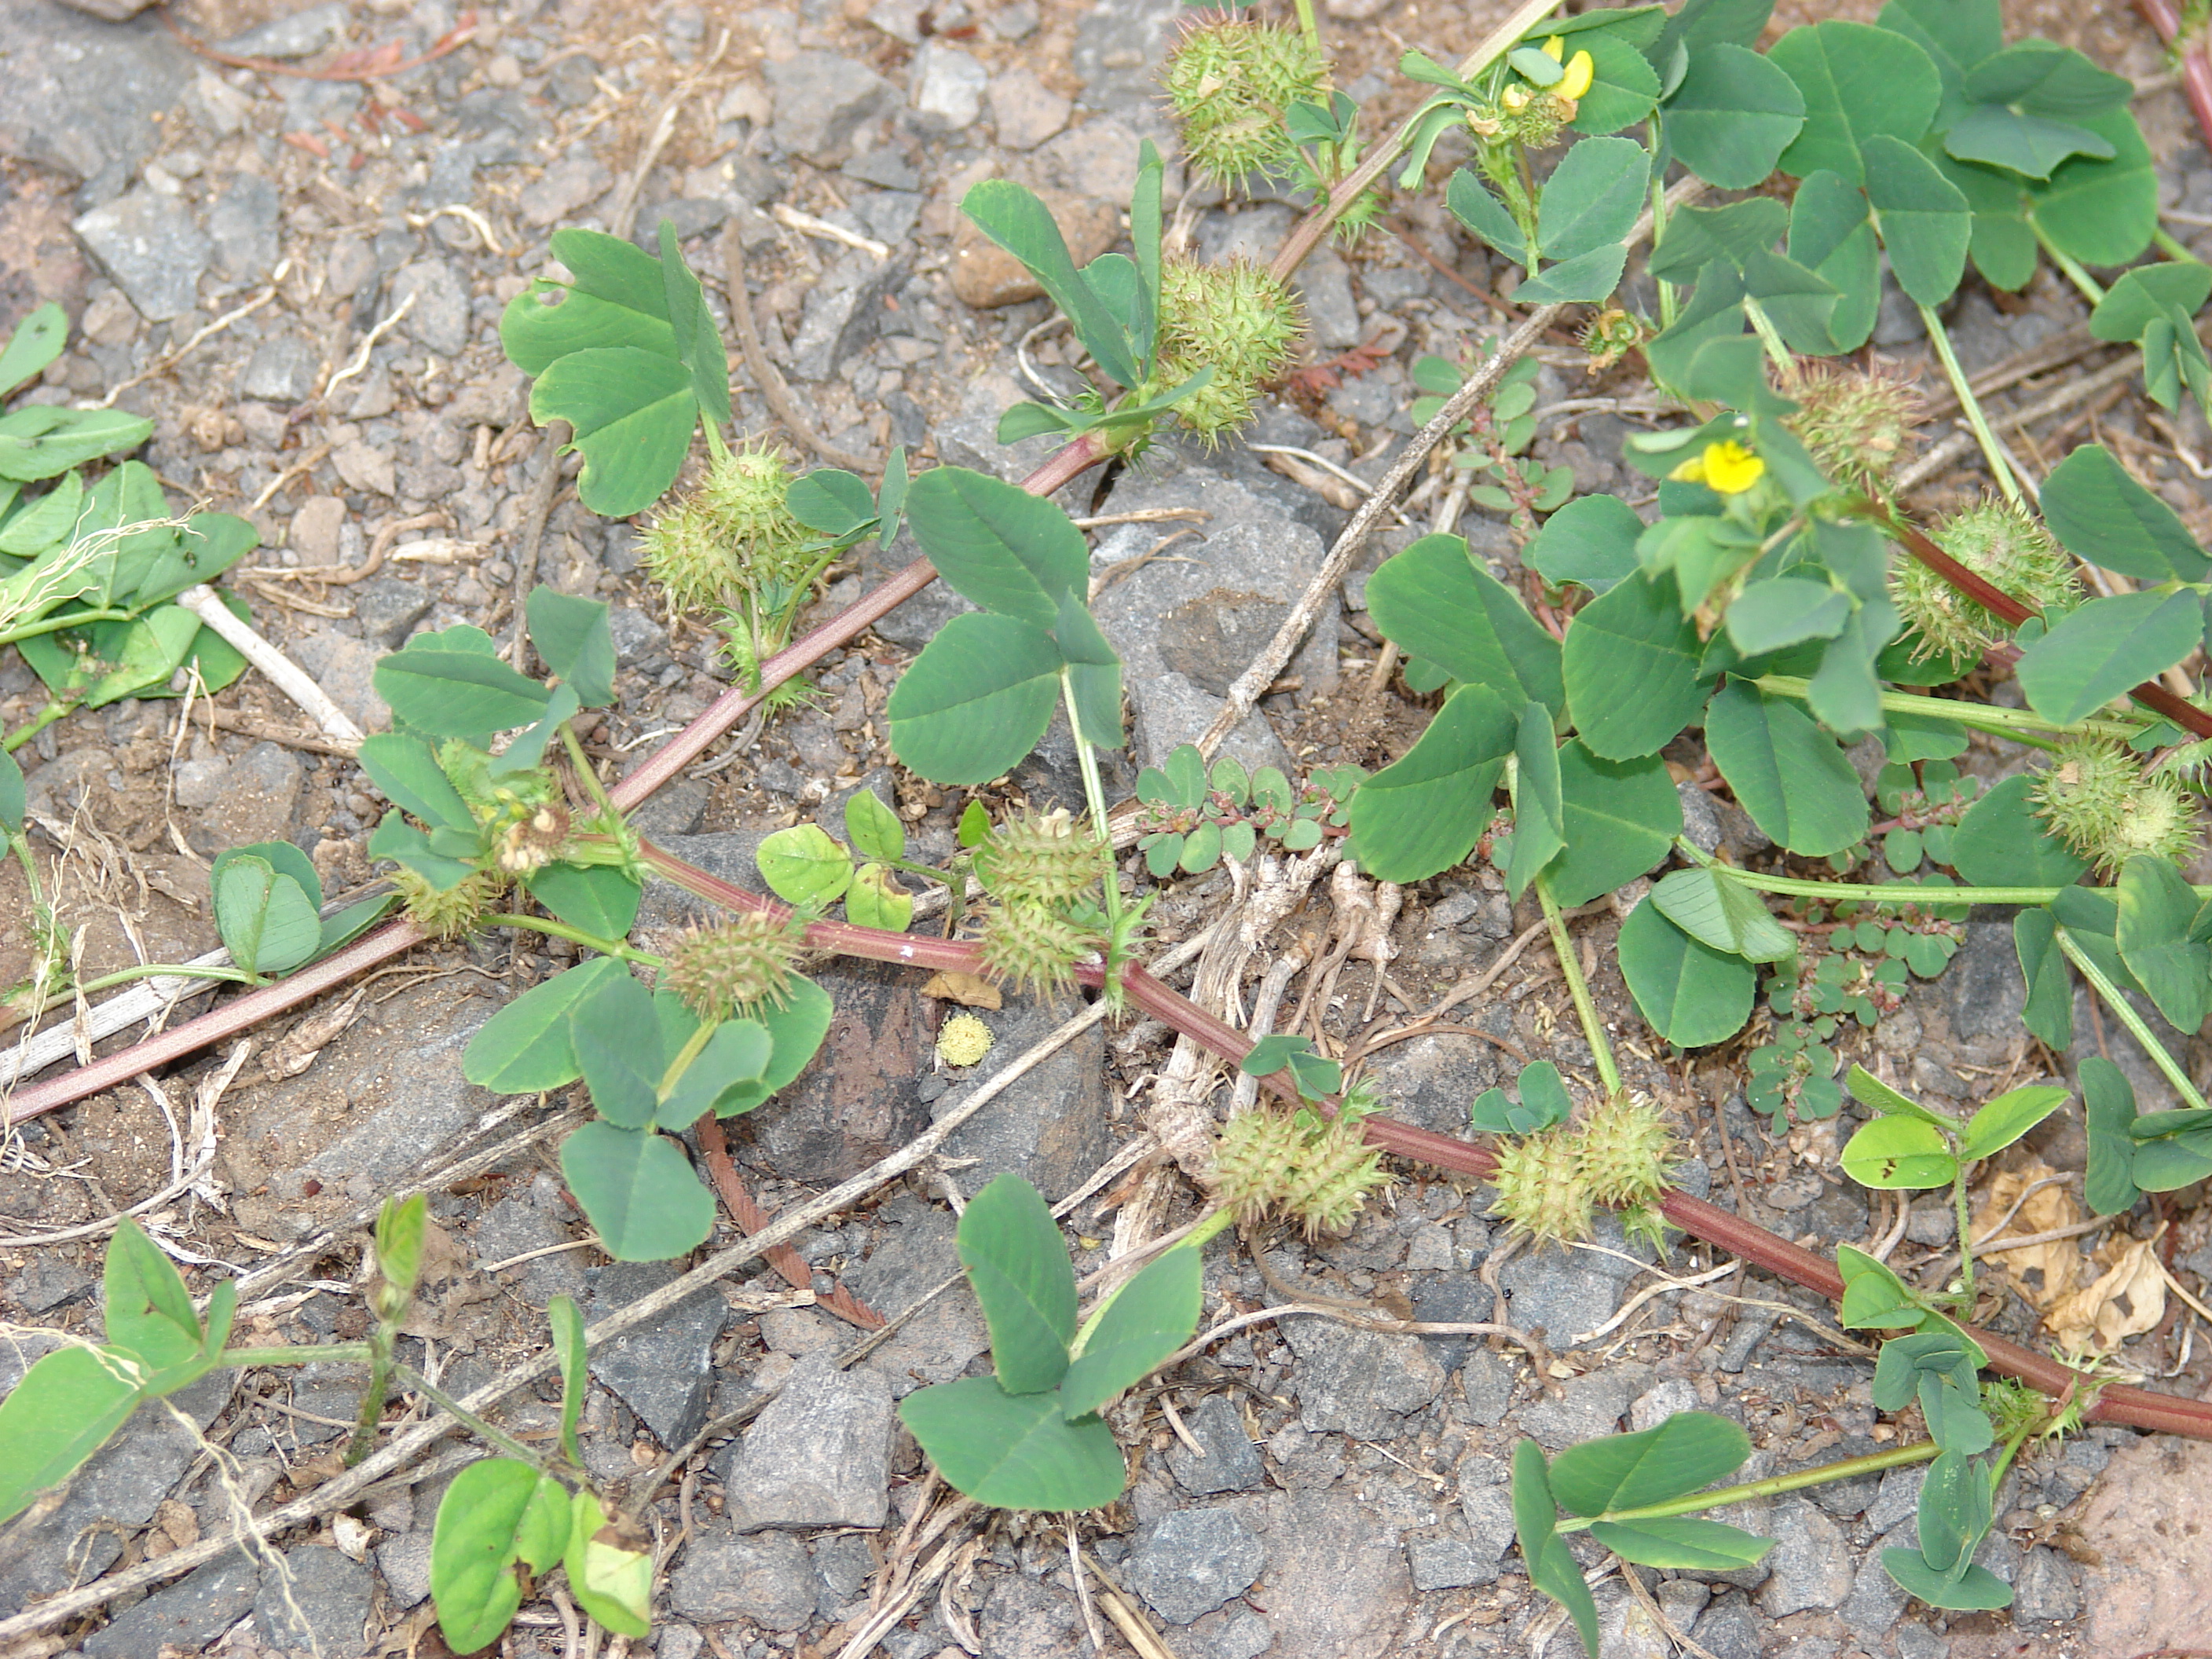 All parts of burclover visible at once: leaves, yellow flowers, and burs